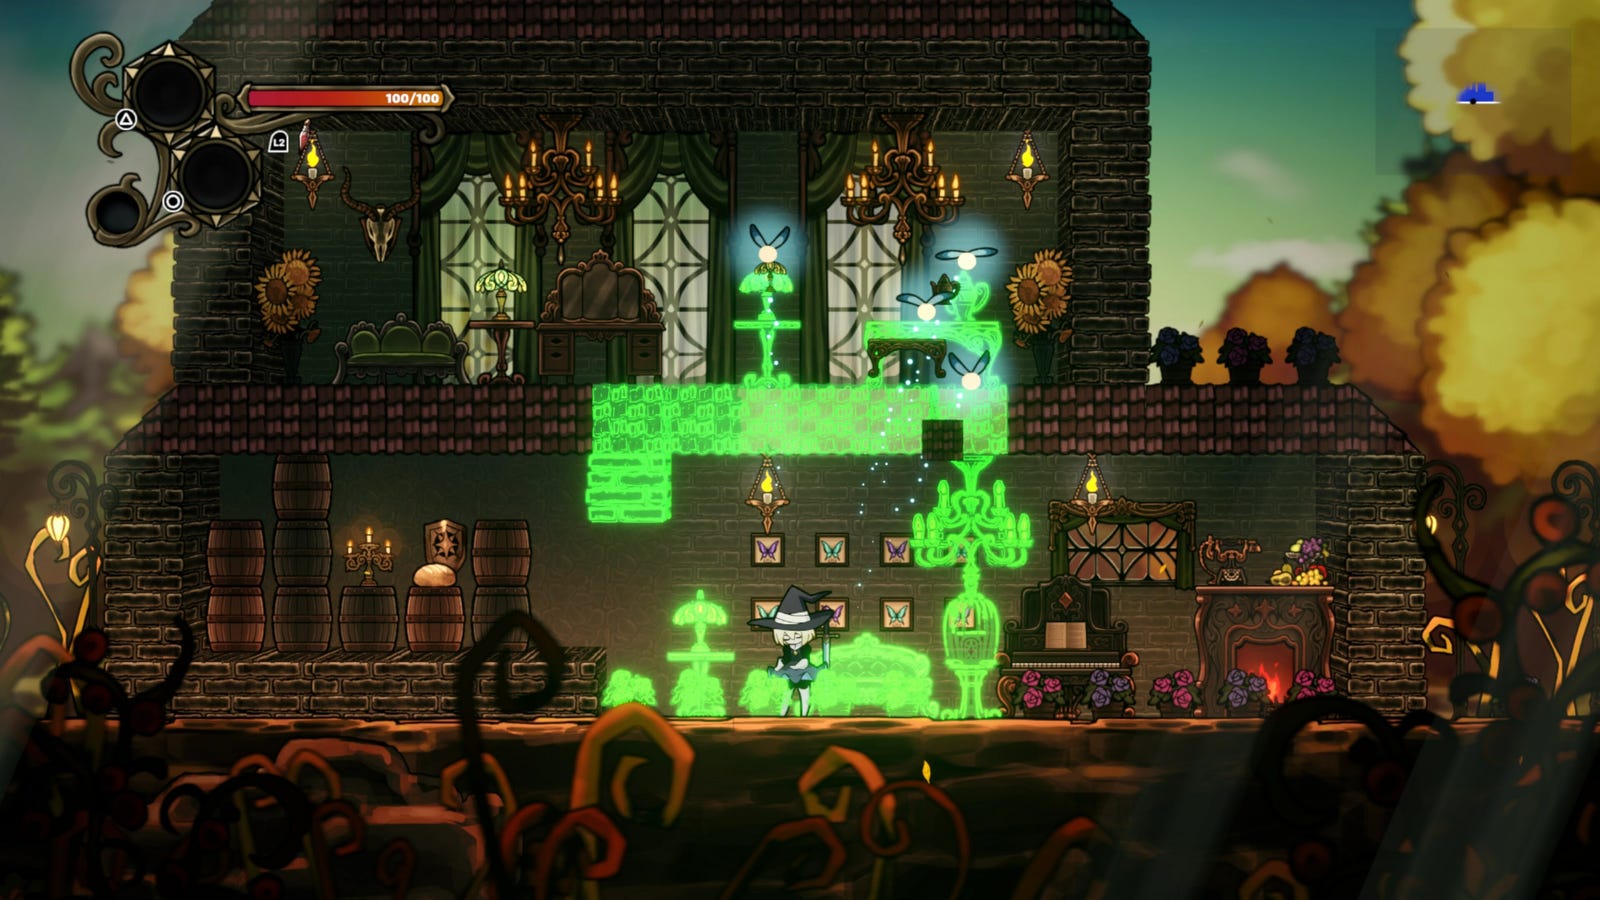 Palworld devs' next game is a base-building Dead Cells and Hollow Knight mash-up